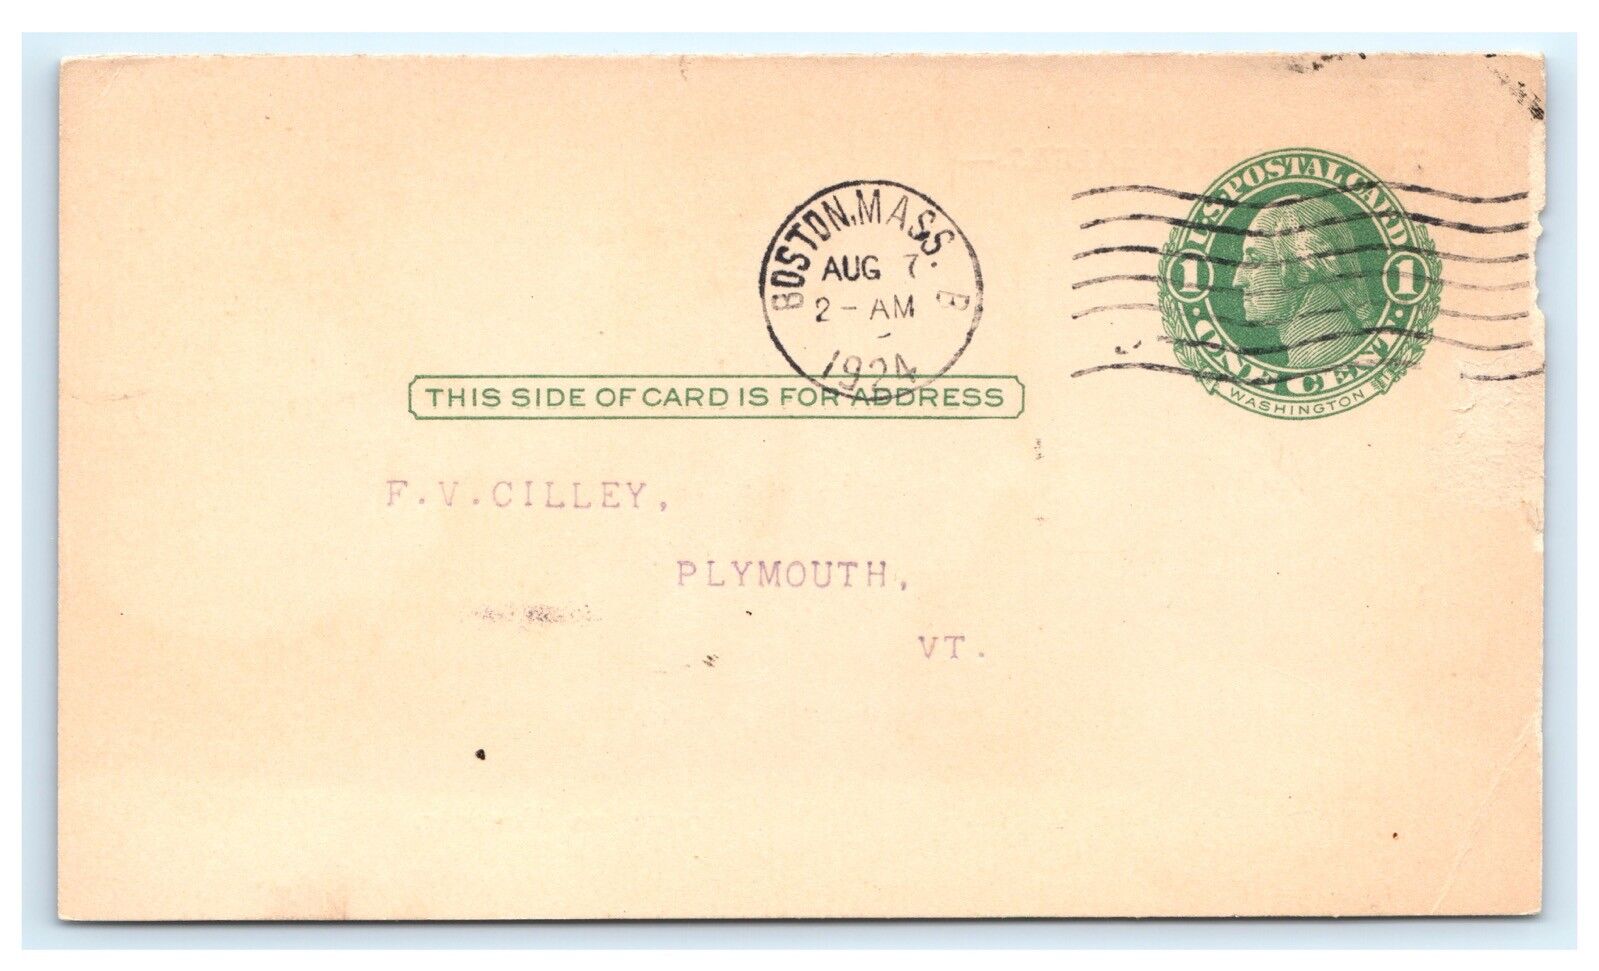 Florence Cilley Store Plymouth VT Boston Post Newsdealer Postcard 1924 A13